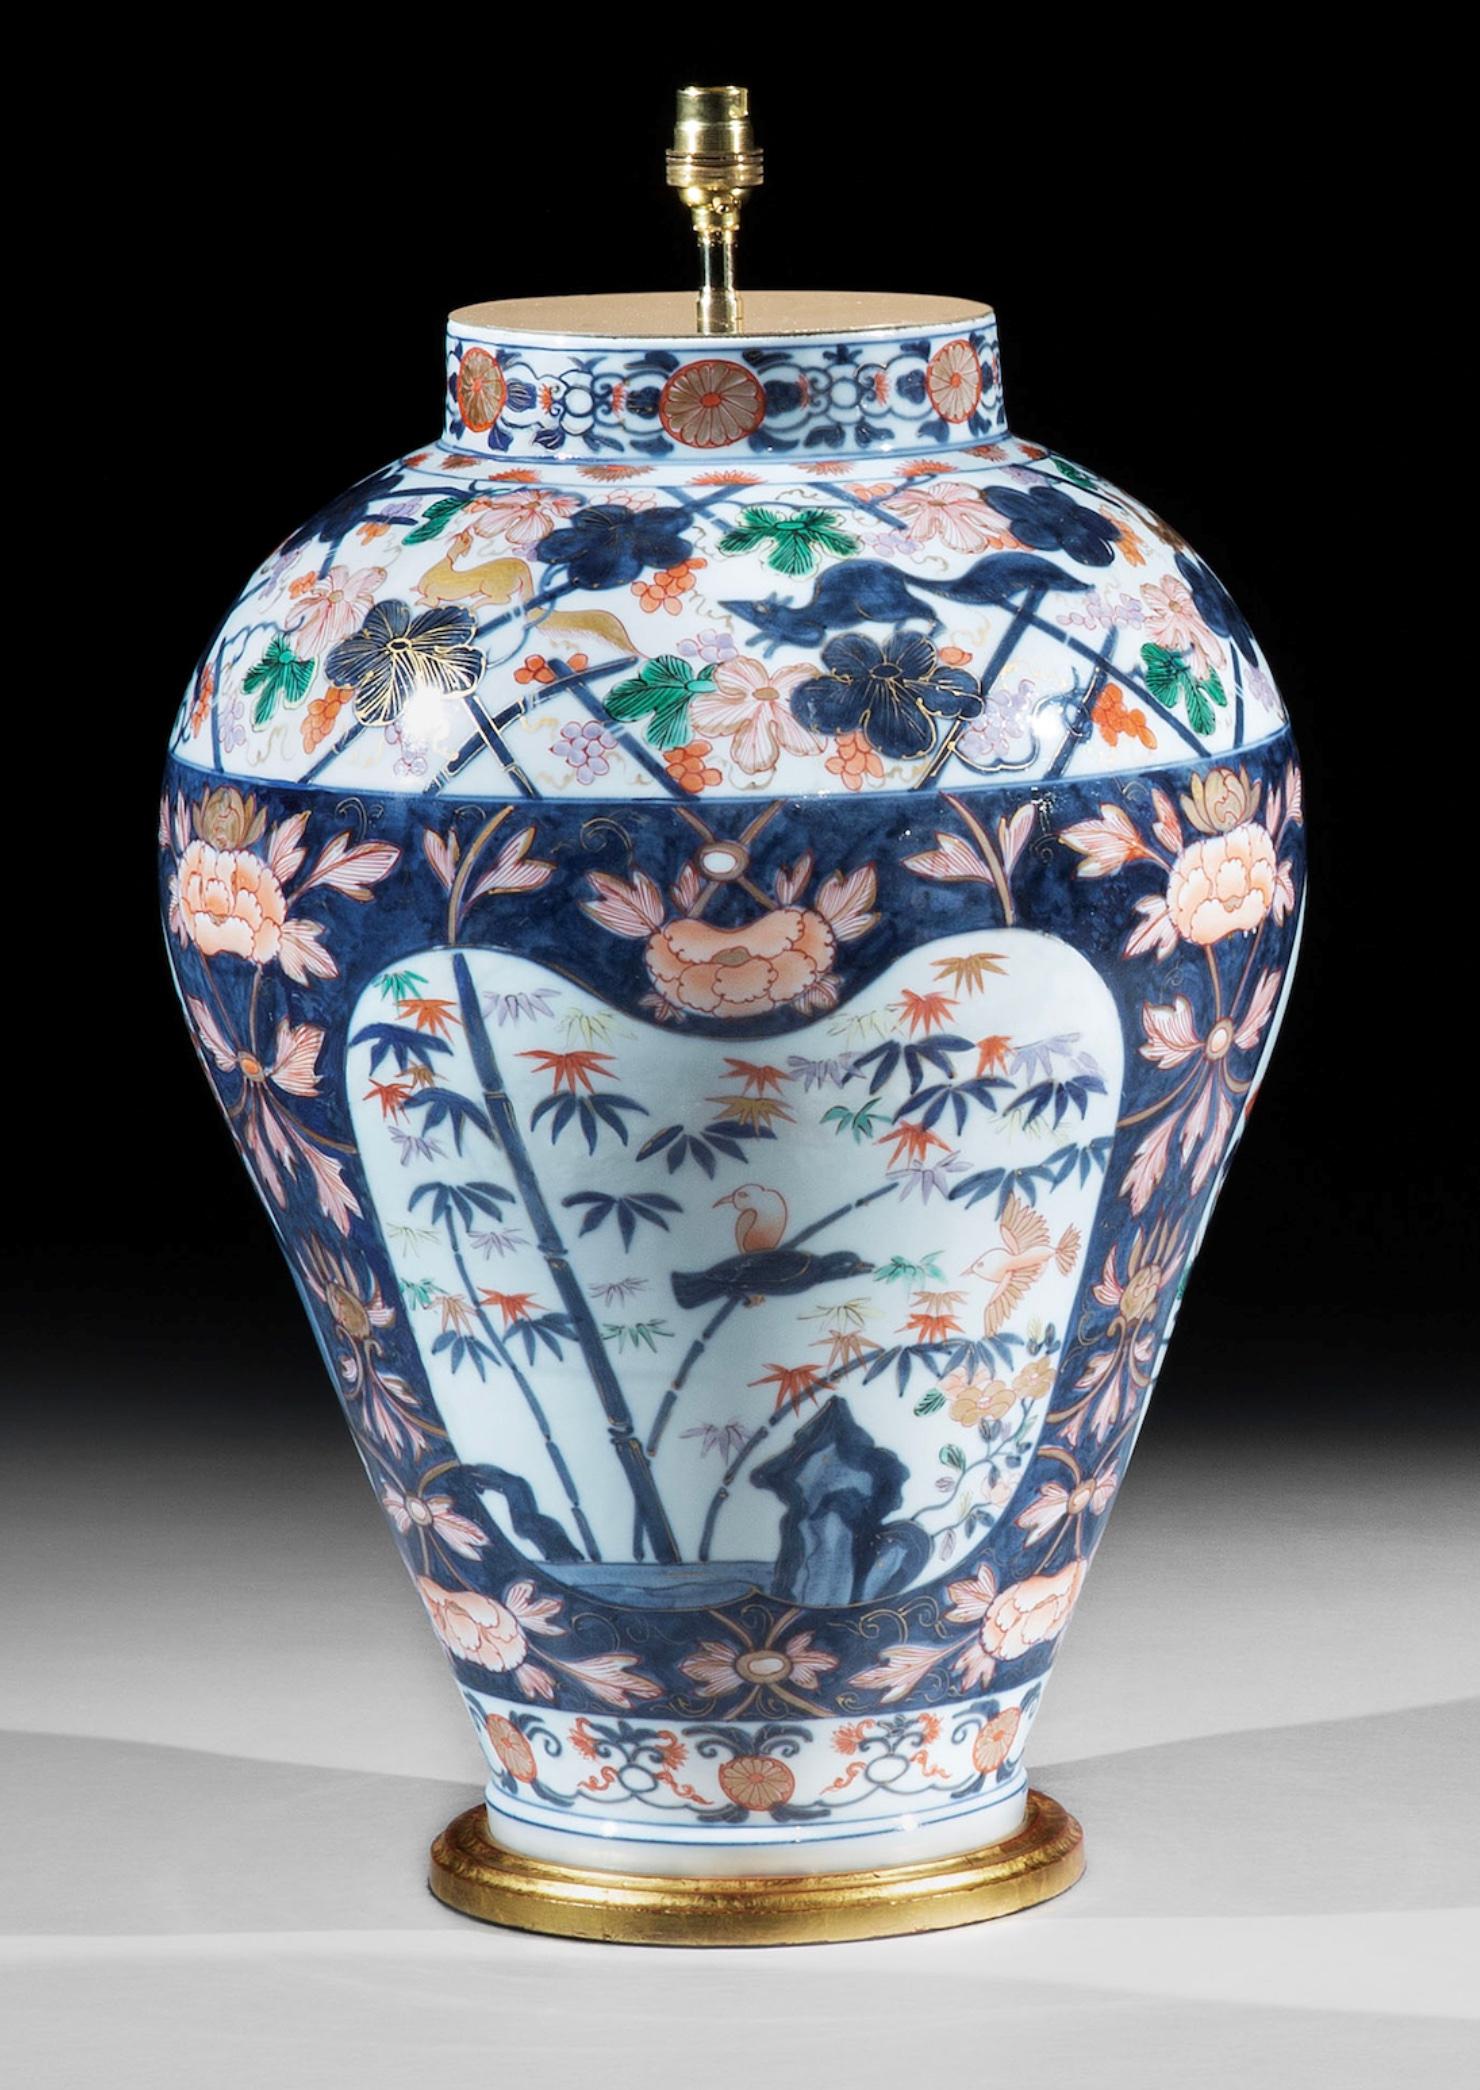 A superb pair of large 19th century Continental porcelain vases and covers, probably Samson. Each vase beautifully decorated in the Imari palette, with pavilions on rocky shorelines, reserved against a blue ground painted with stylised flowers and